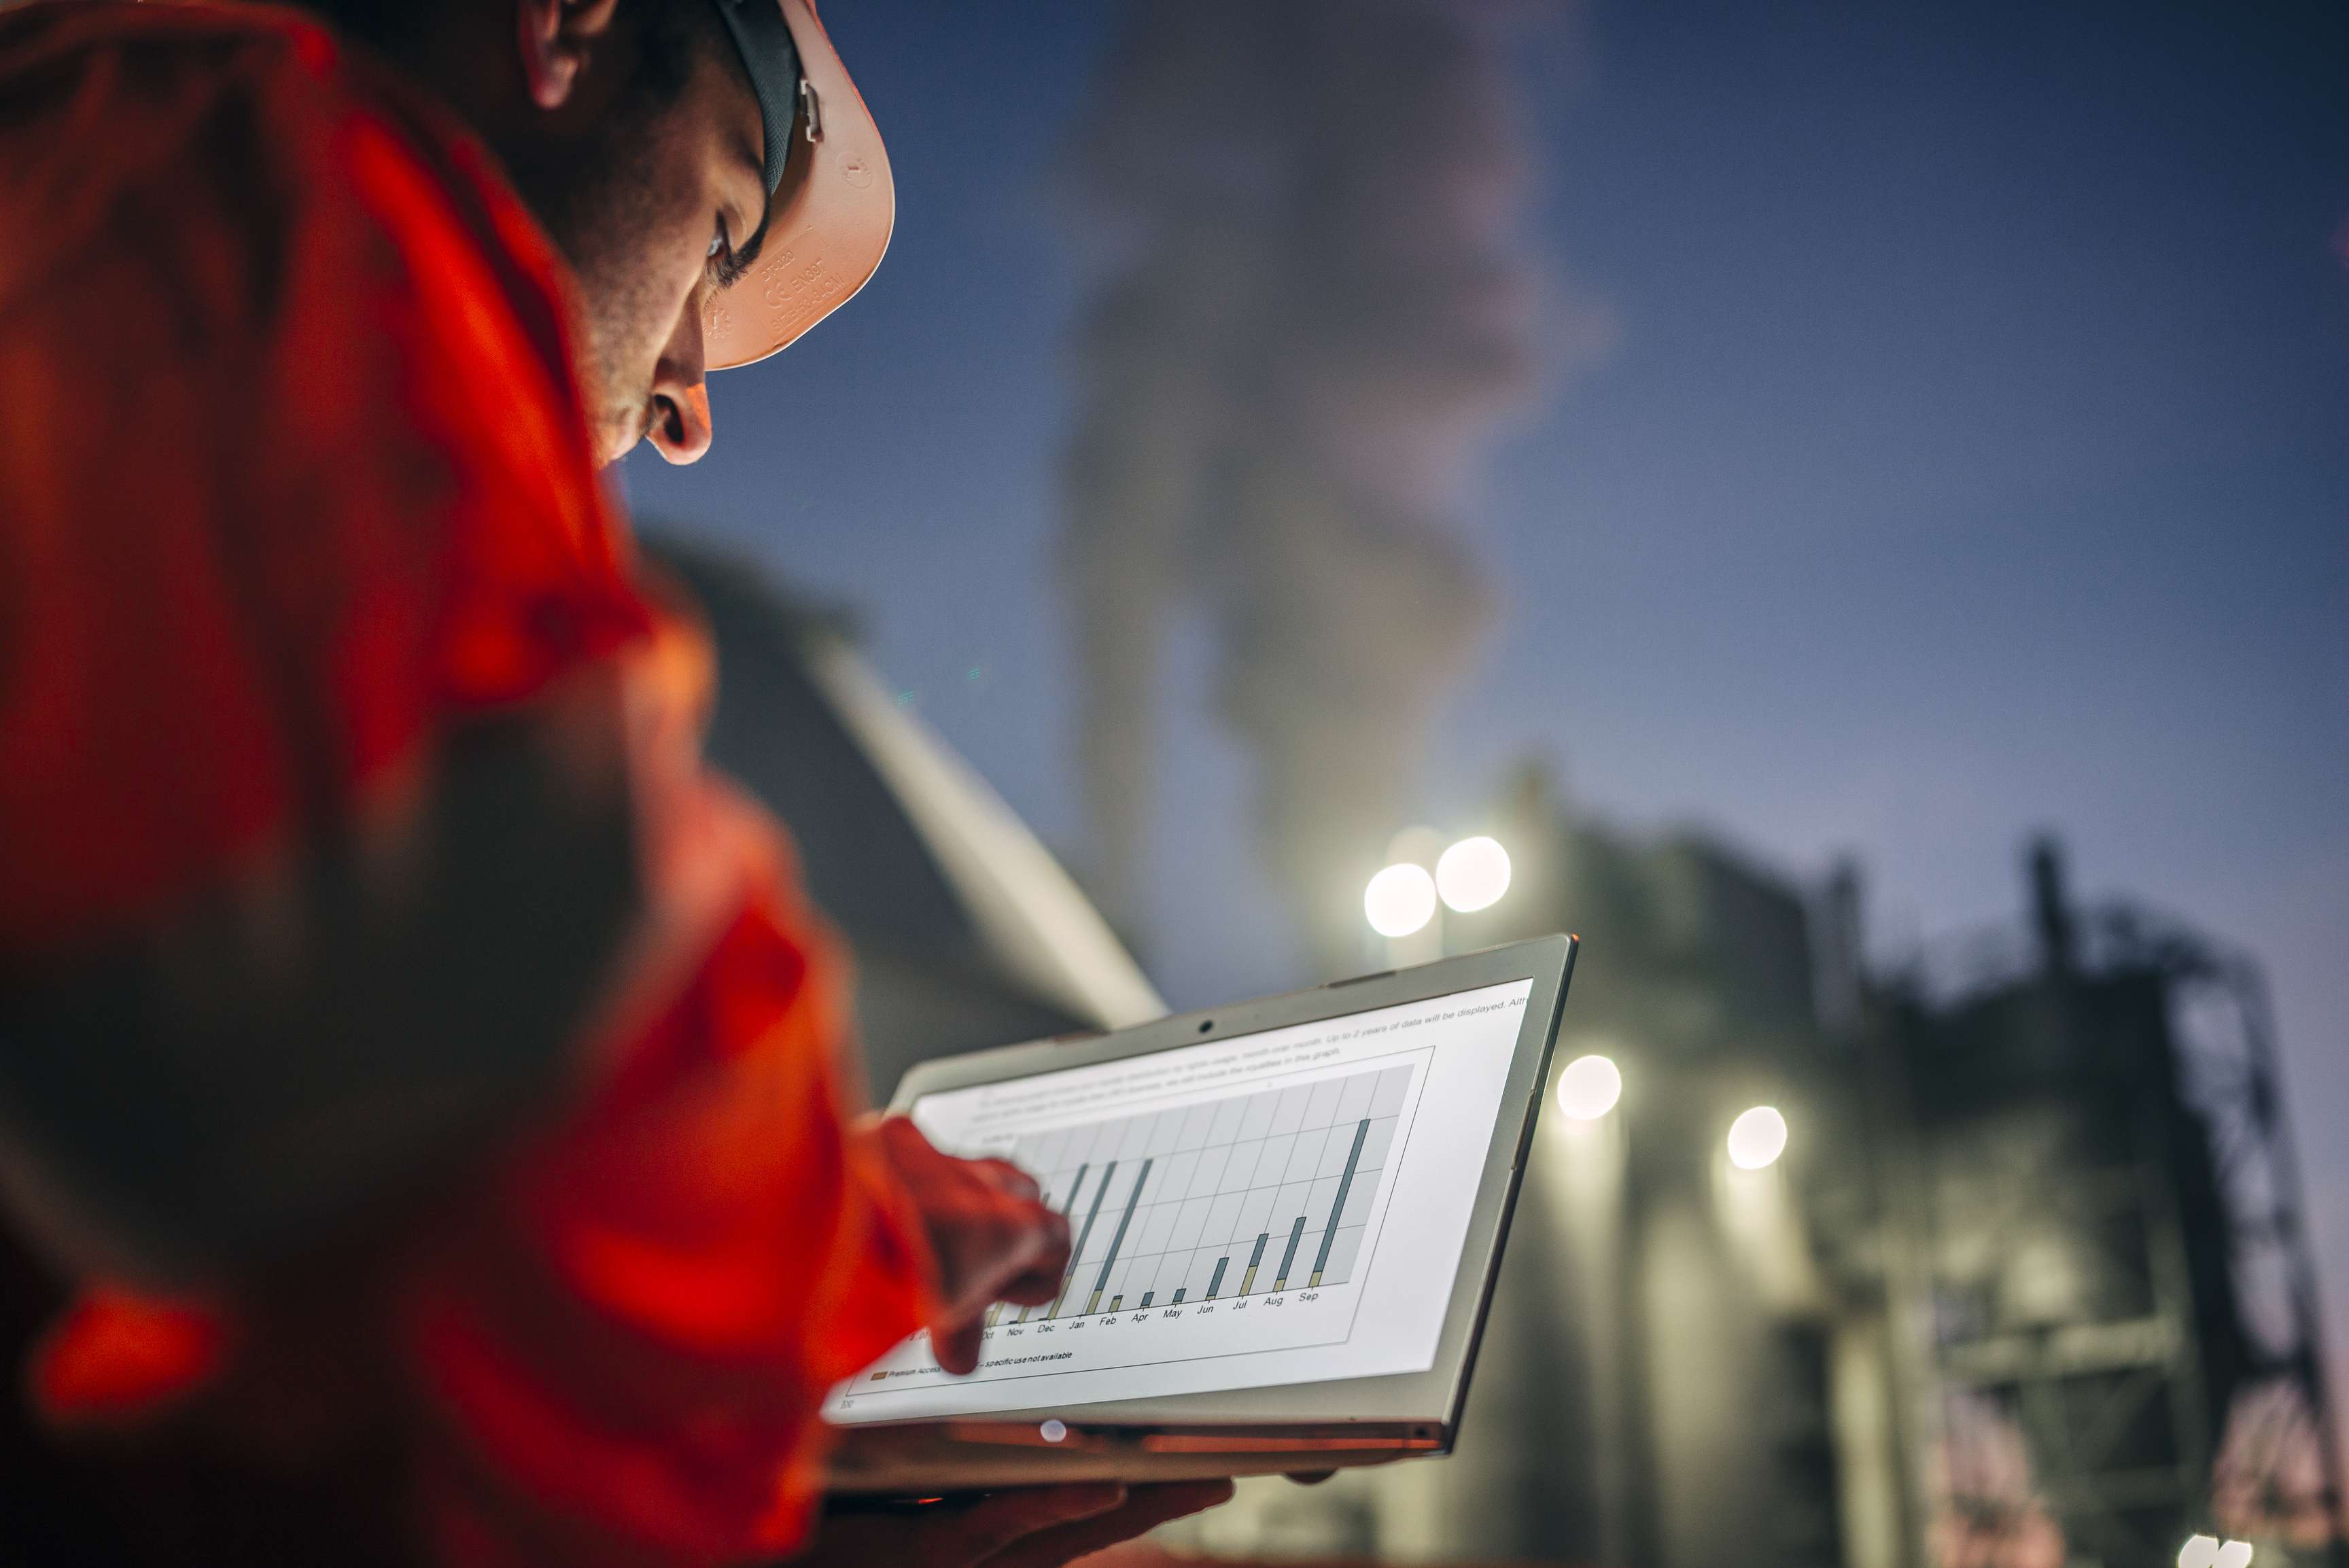 Expert in front from behind in orange jumpsuit looking at graphics on his laptop in front of a refinery at night.